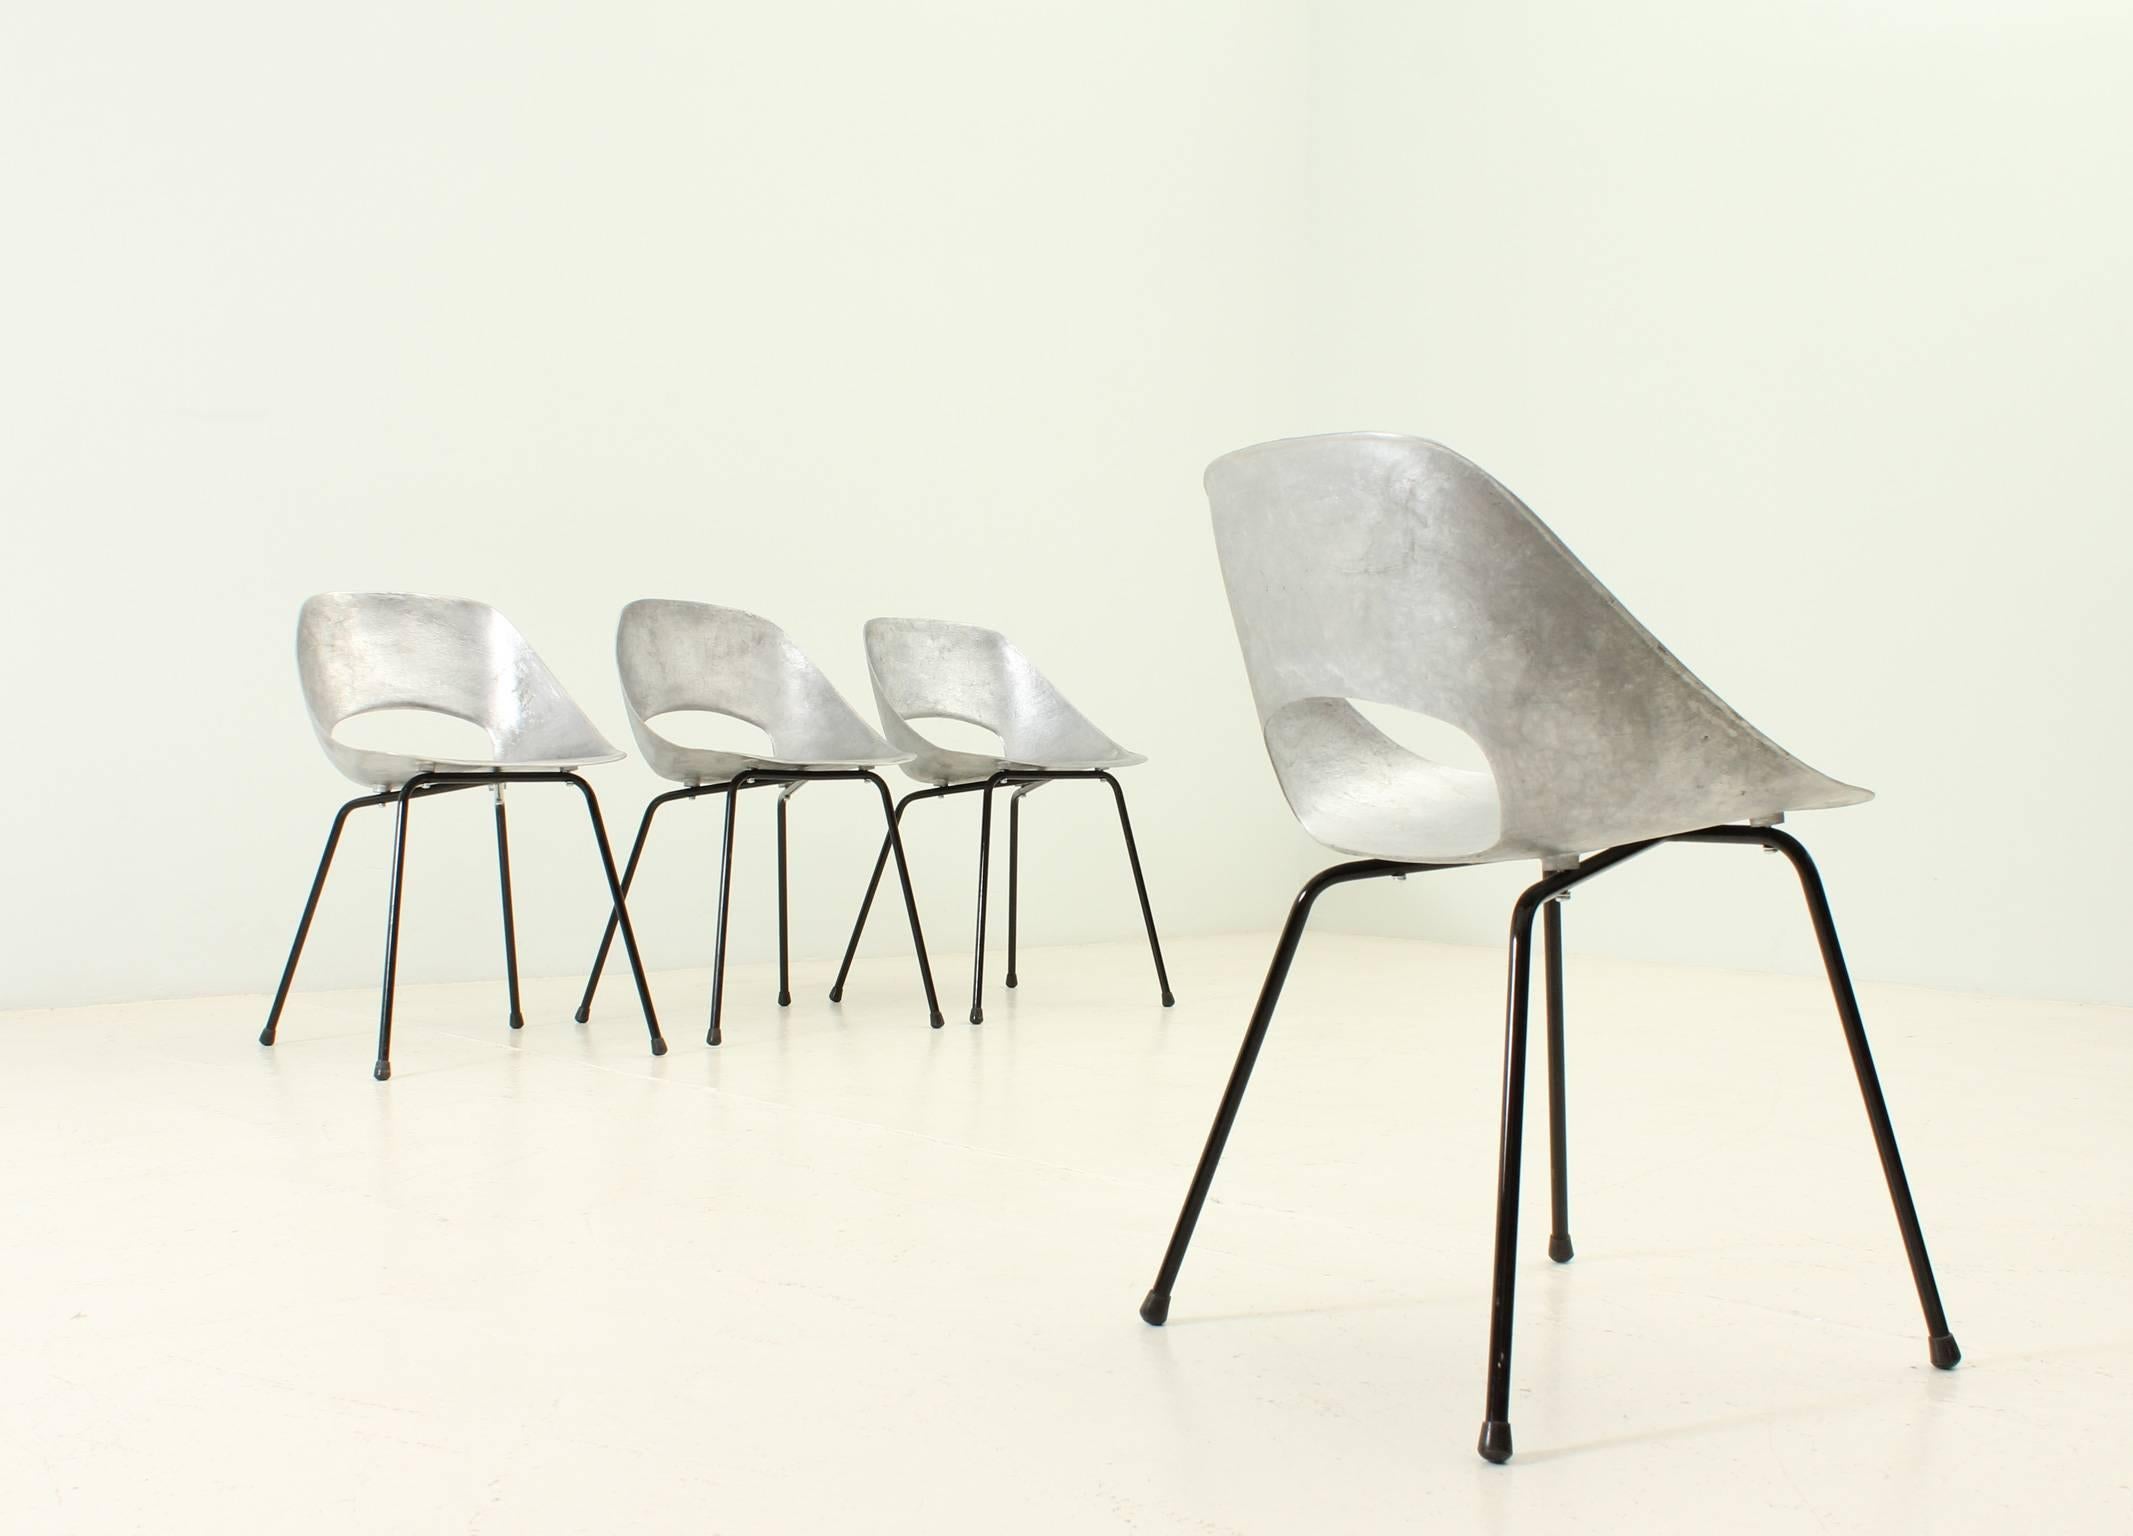 A set of four Tulip chairs designed by Pierre Guariche in 1954 for Steiner, France. Cast aluminium shell and lacquered metal base.